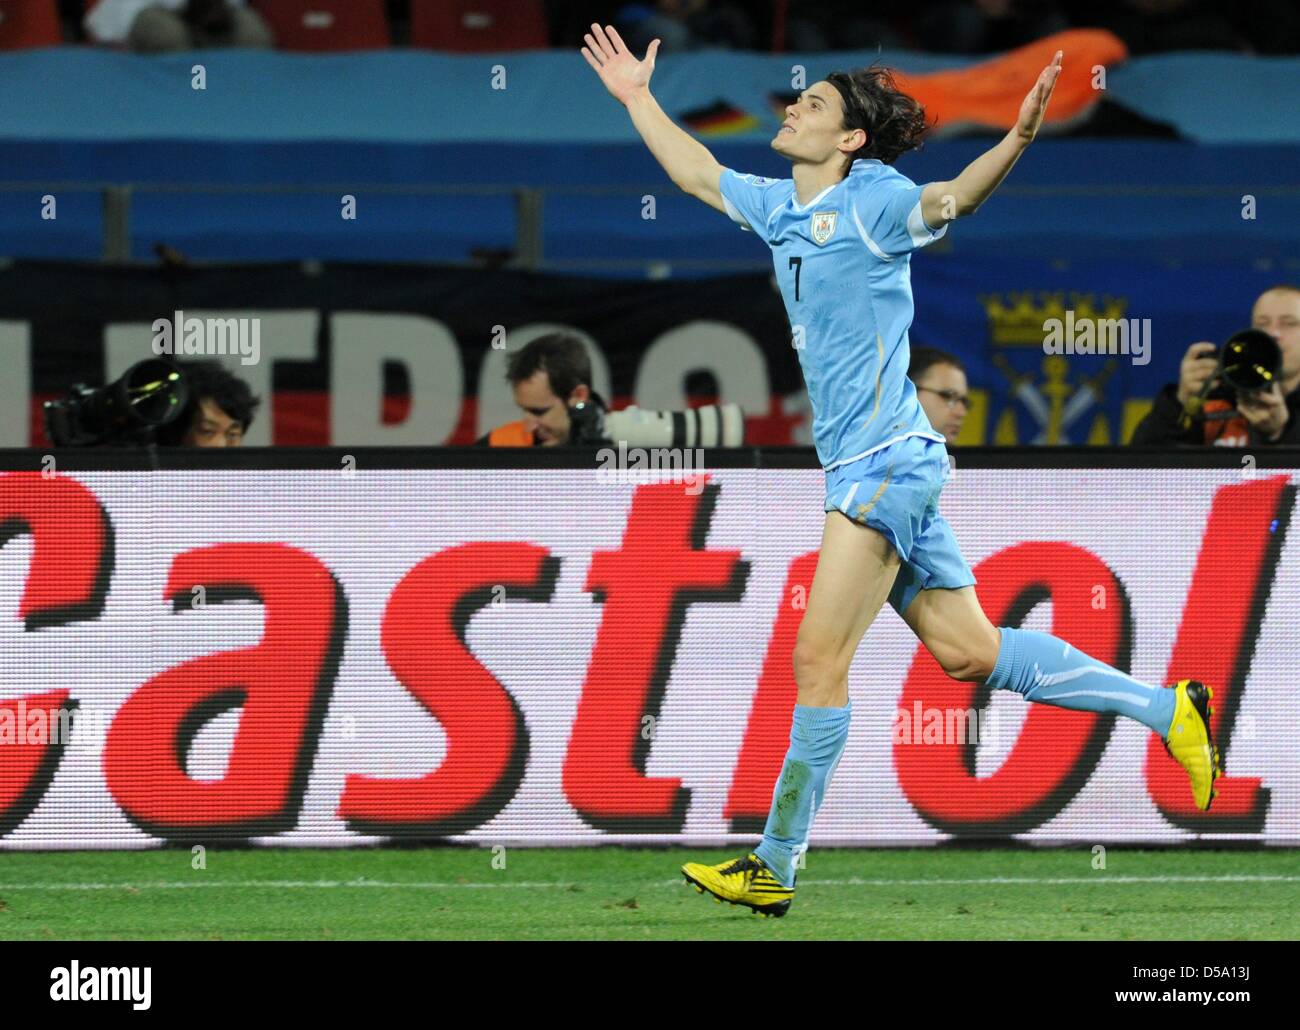 Uruguay's Edinson Cavani celebrates after equalising 1-1 during the 2010 FIFA World Cup third place match between Uruguay and Germany at the Nelson Mandela Bay Stadium in Port Elizabeth, South Africa 10 July 2010. Photo: Marcus Brandt dpa - Please refer to http://dpaq.de/FIFA-WM2010-TC  +++(c) dpa - Bildfunk+++ Stock Photo